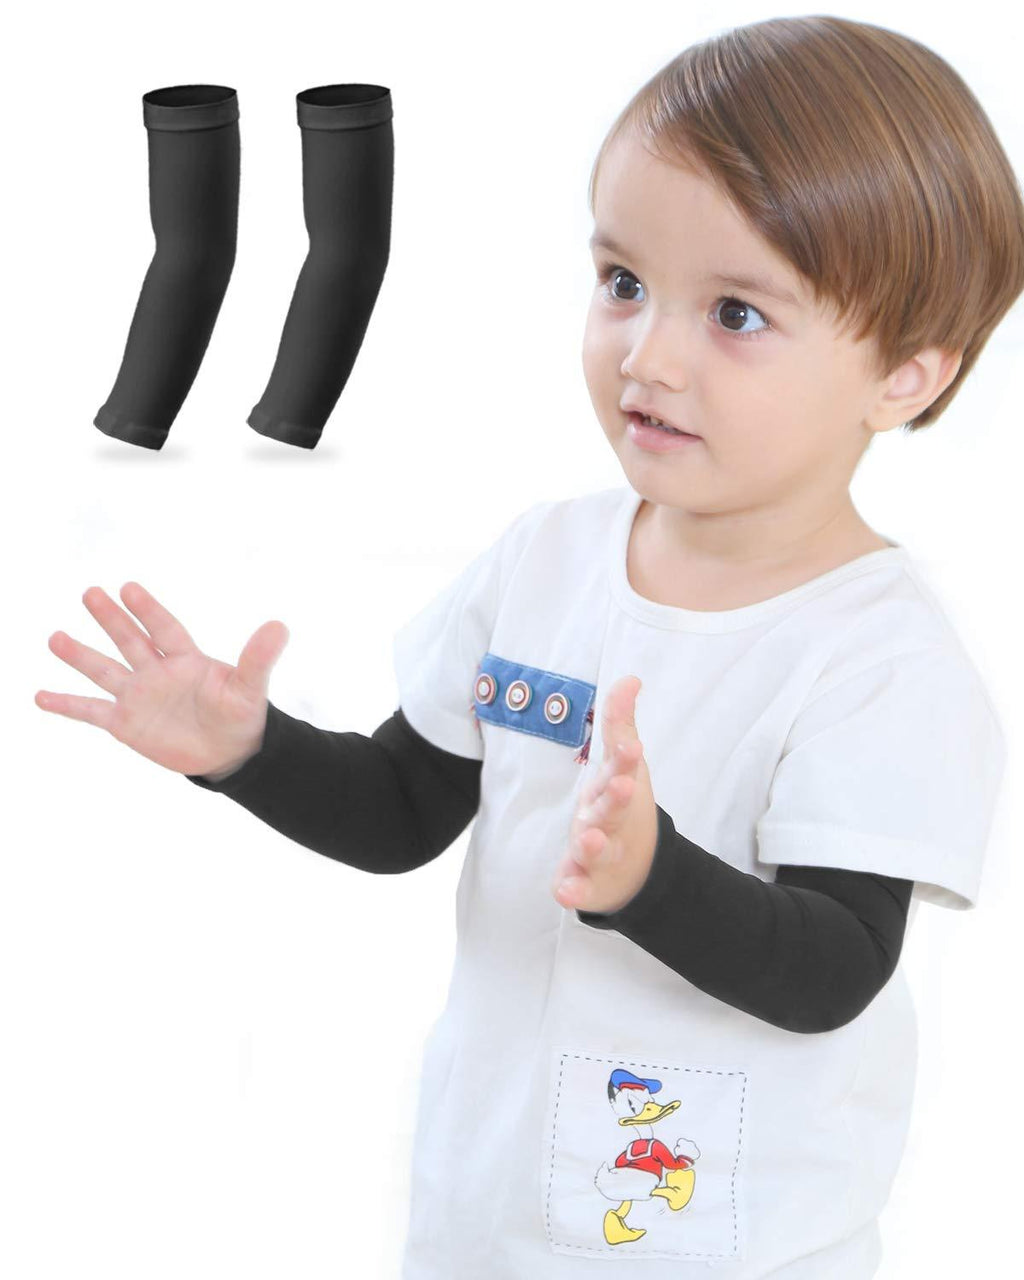 Arm Sleeves for Kids, Toddlers, UPF 50 UV Sun Protection Sleeves to Cover Arms M-1 Pair Black Medium - BeesActive Australia